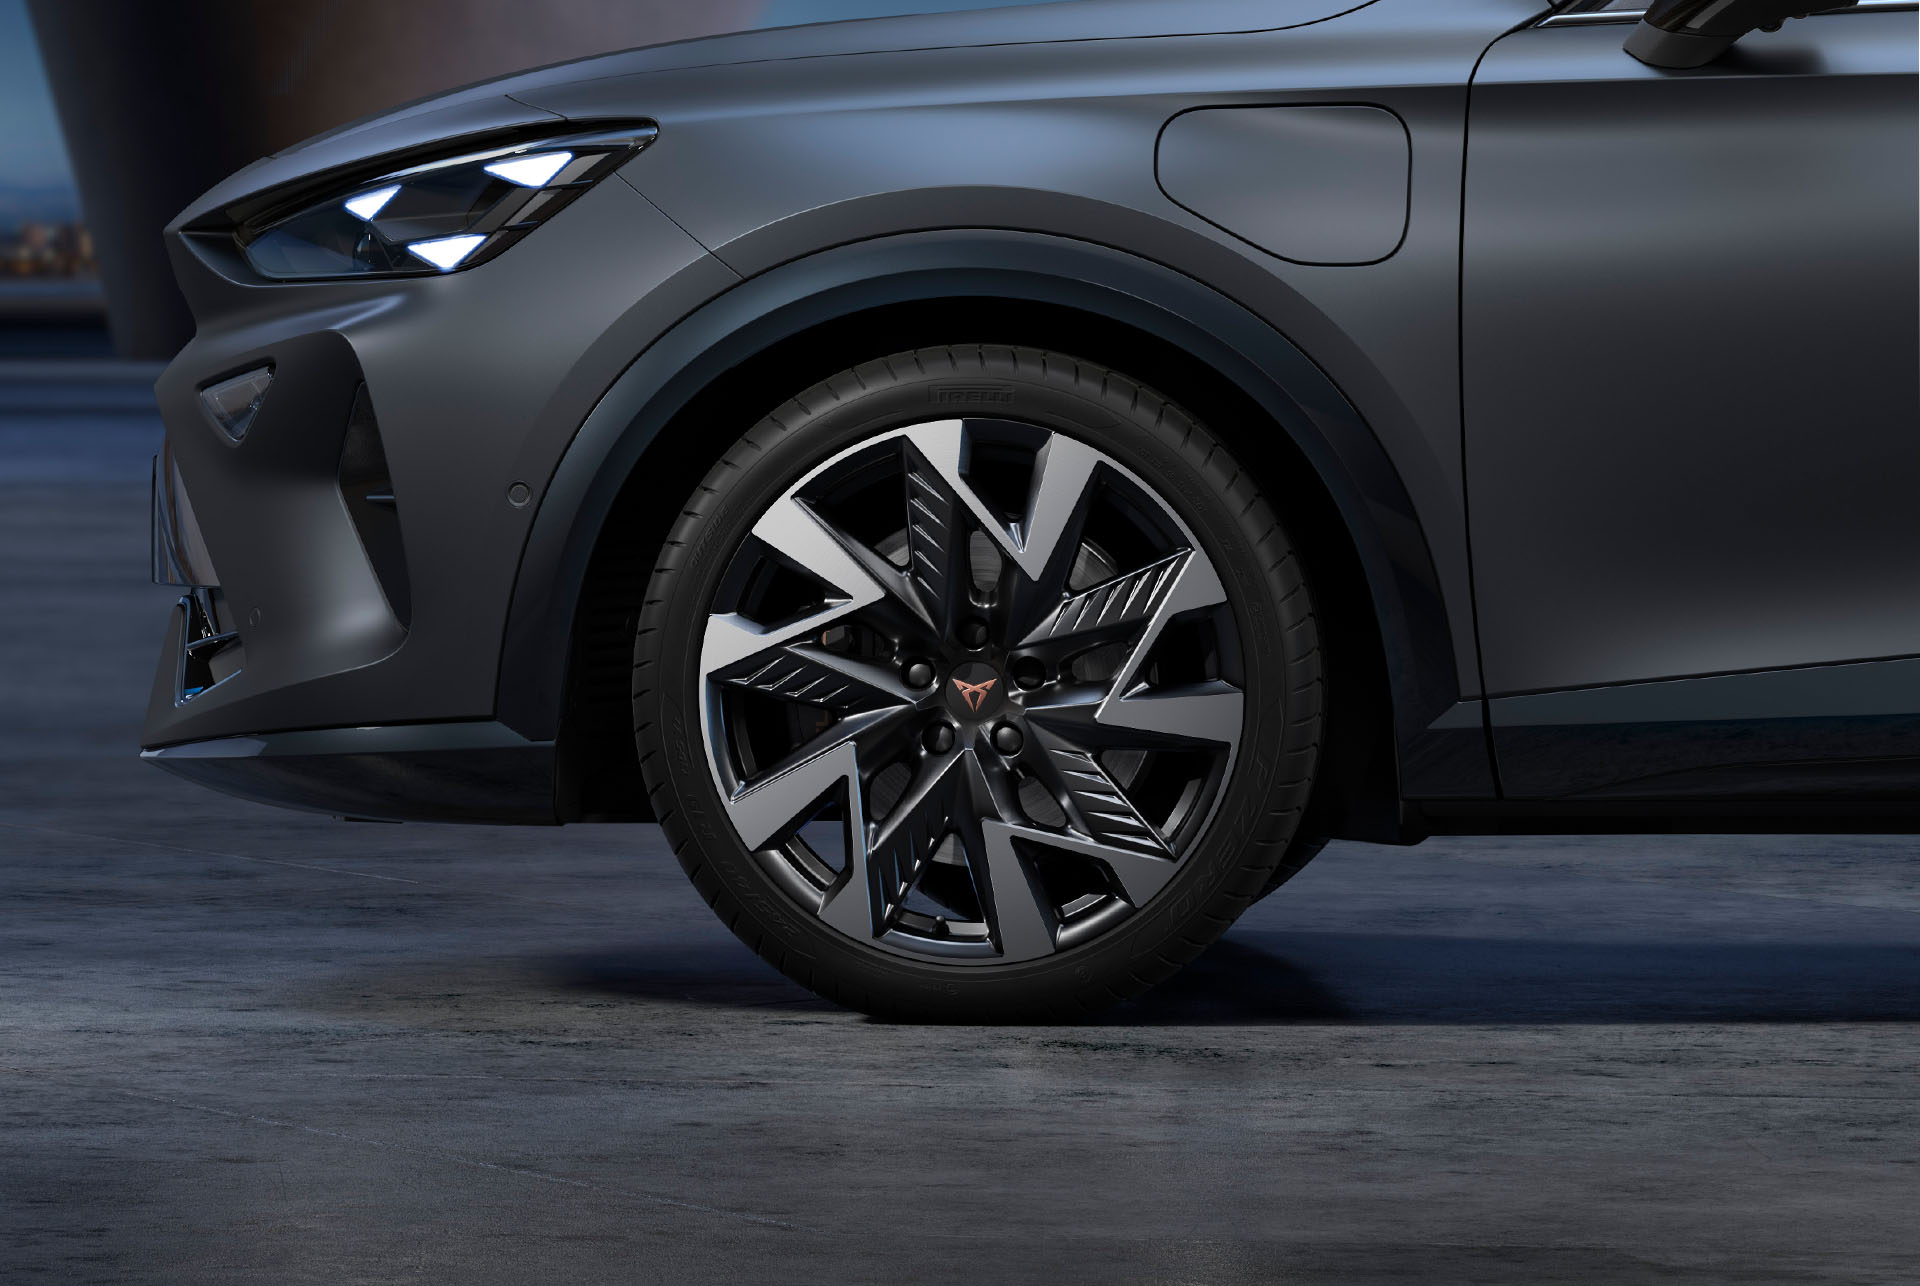 Sandstorm black and silver new CUPRA Formentor 2024 alloy car wheels and tyres with logo in the middle.